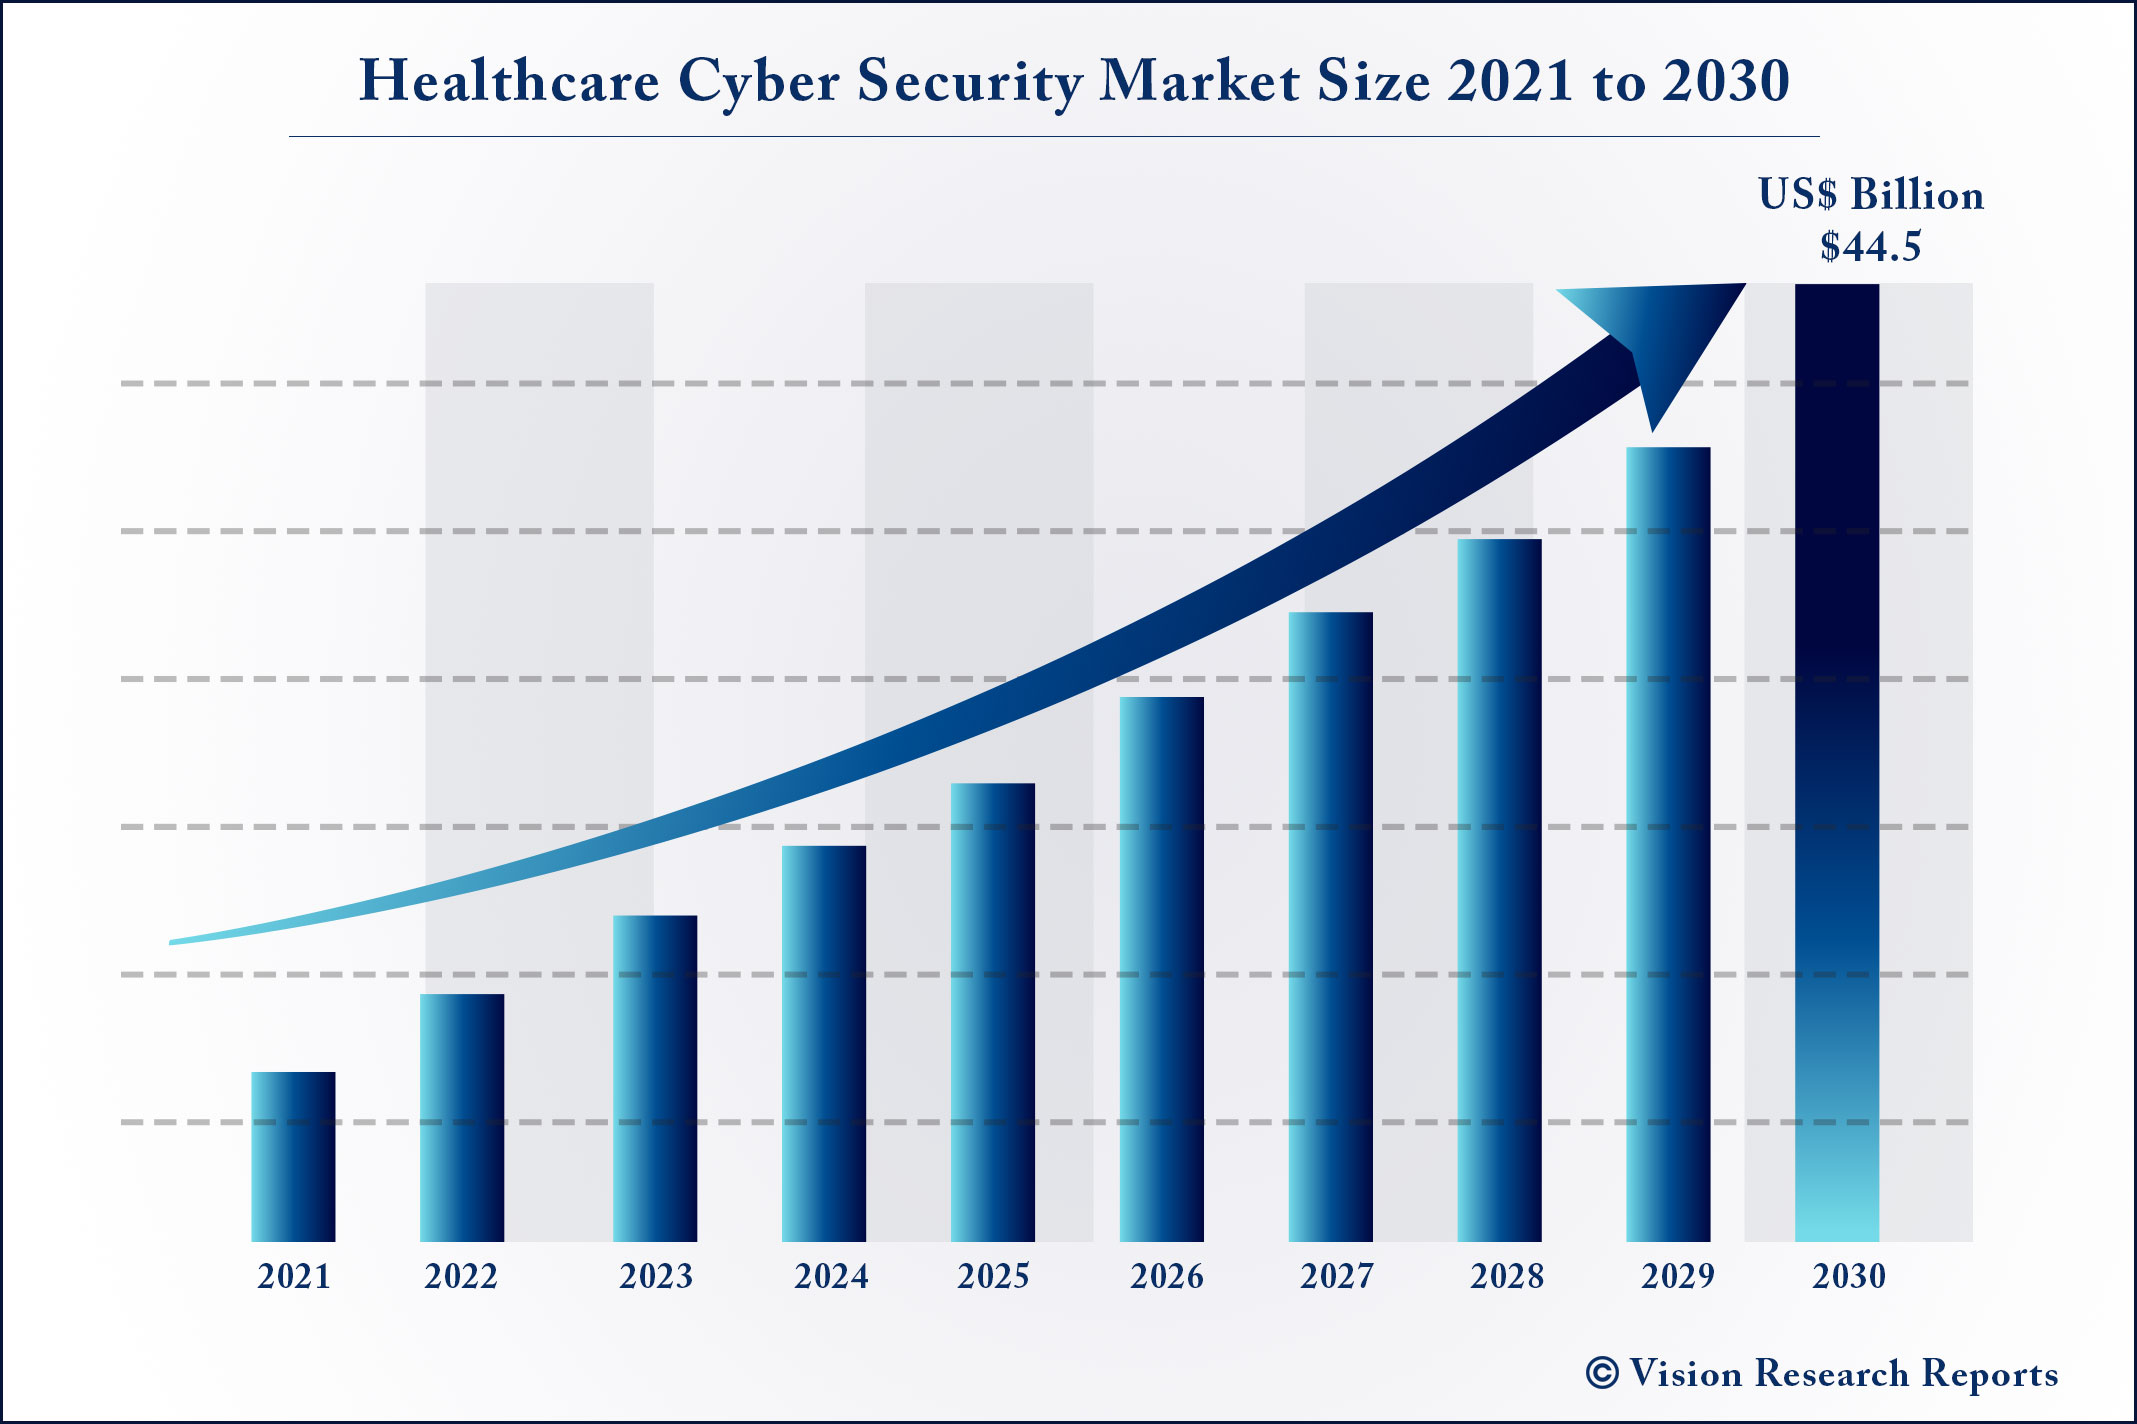 Healthcare Cyber Security Market Size 2021 to 2030